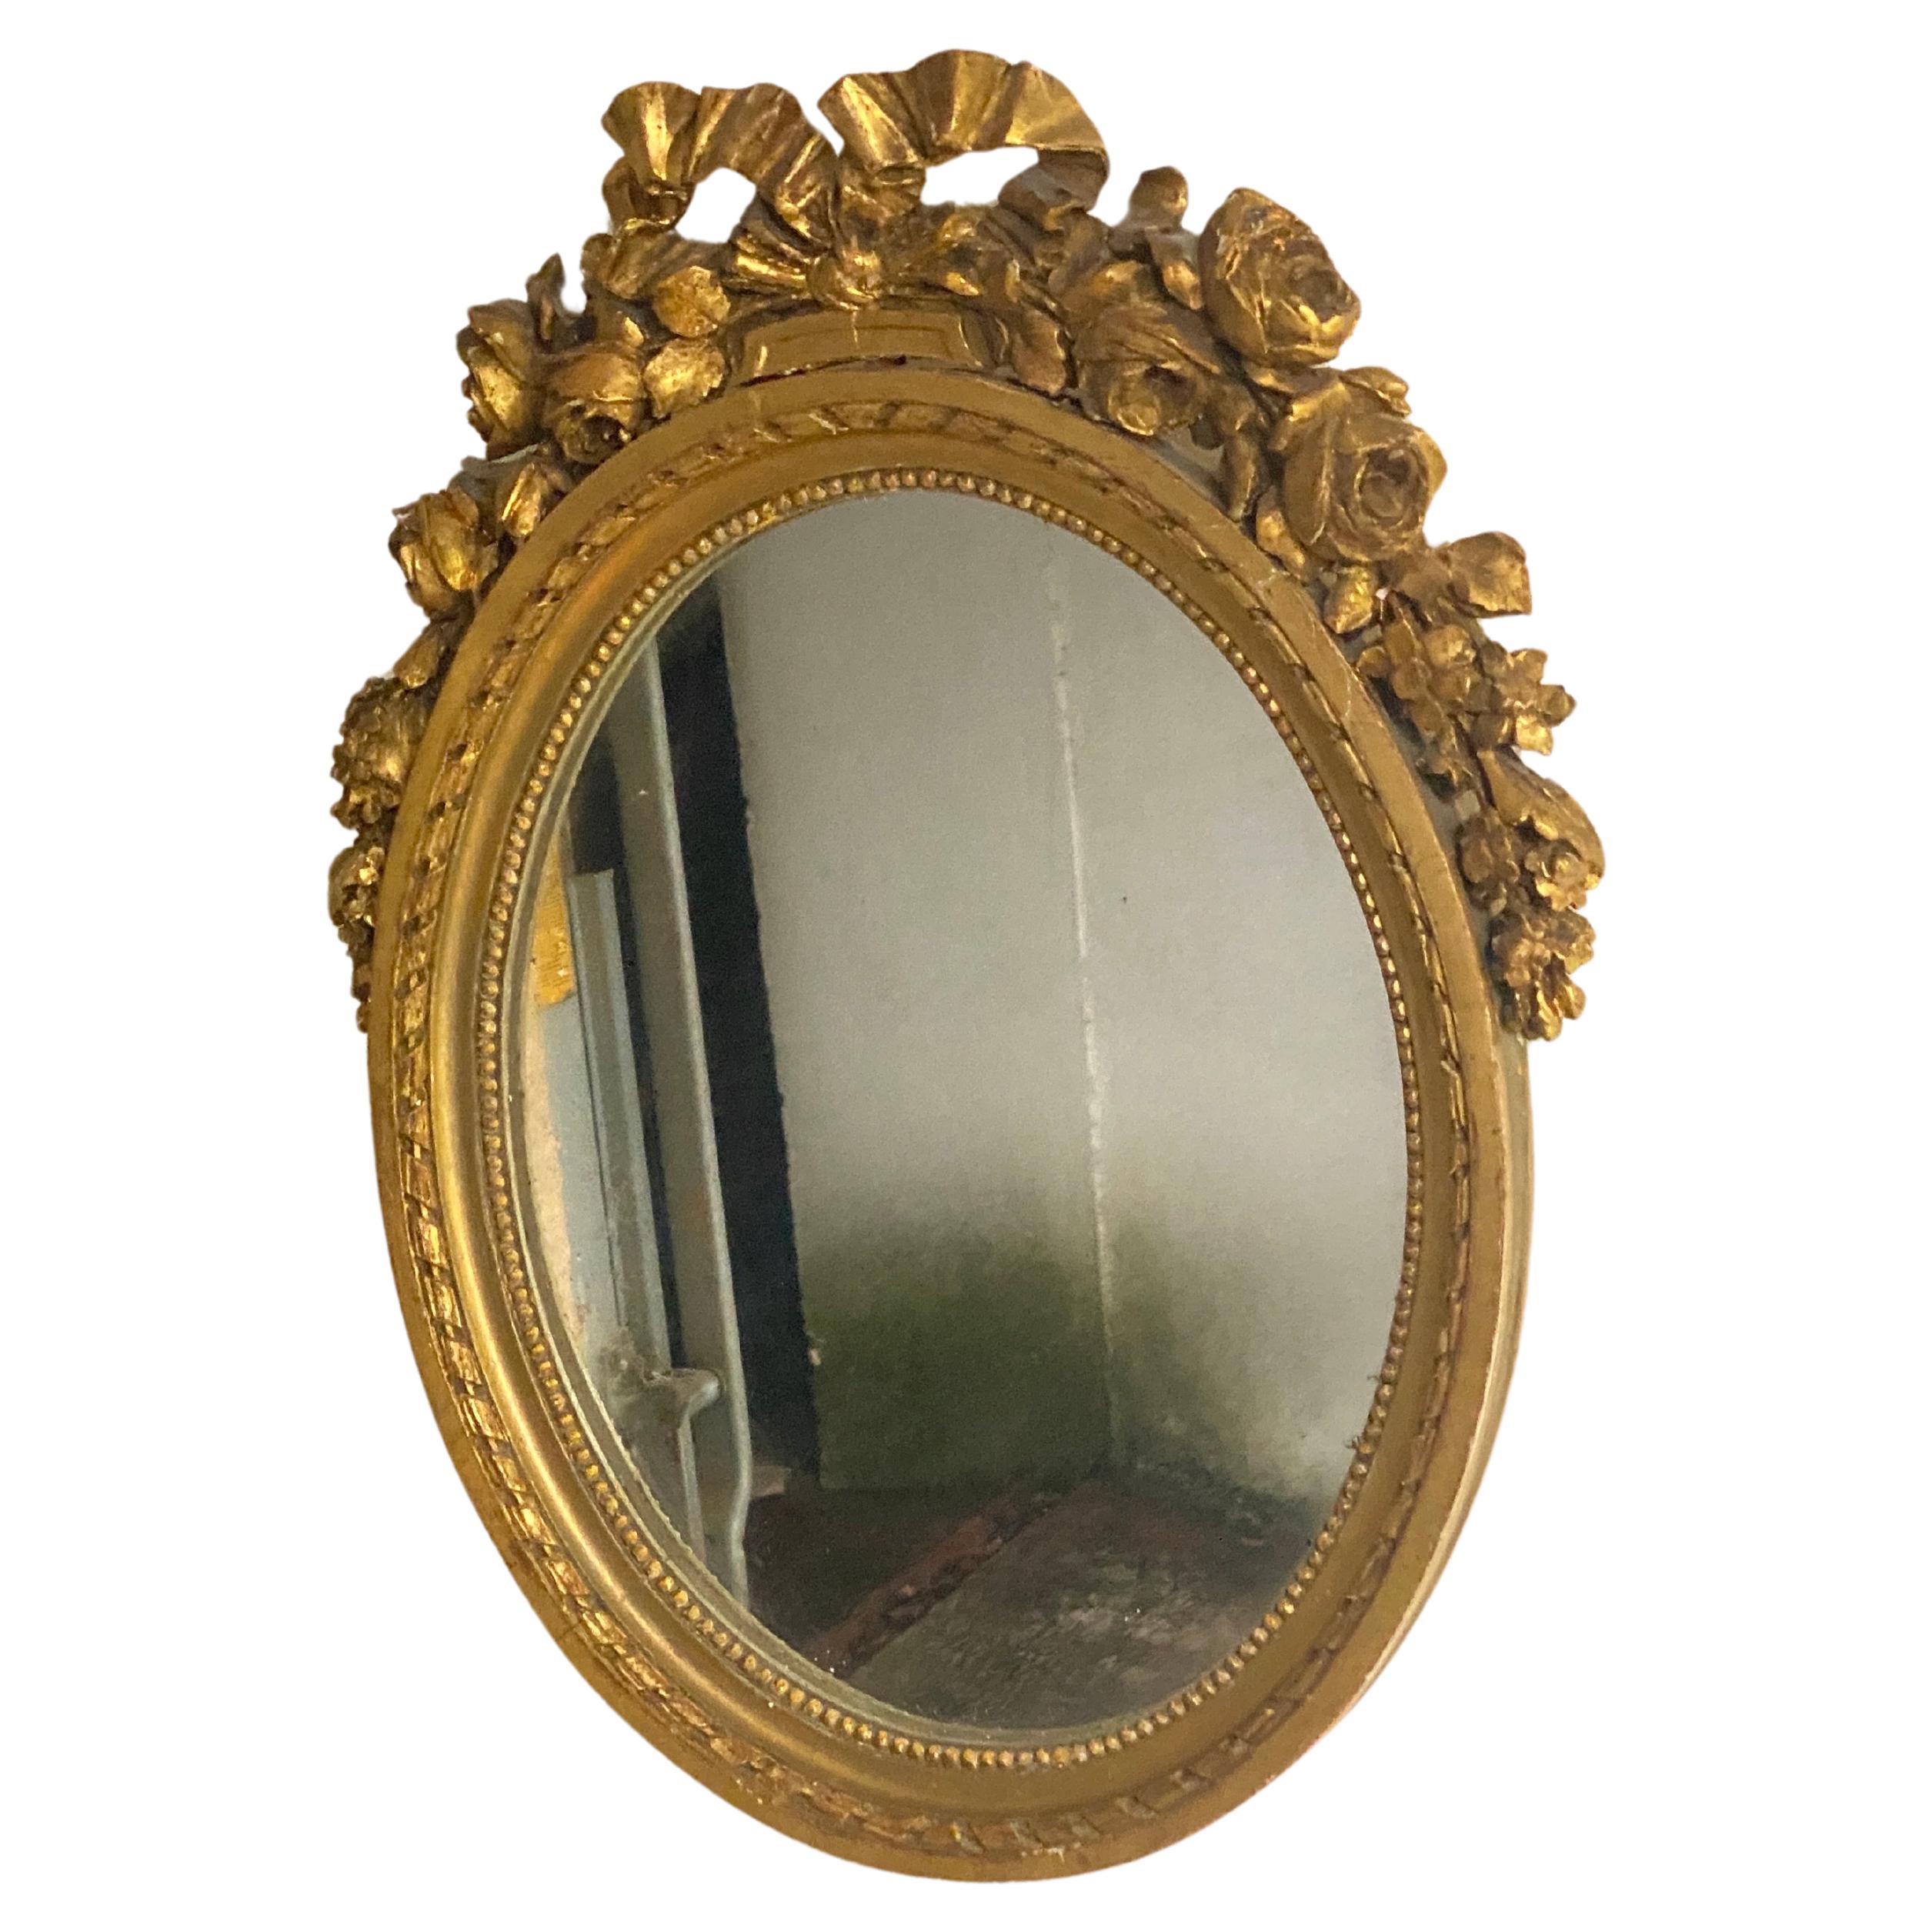 This is a wood gilt Table mirror, in a gold color, with an old Patina. It has been made in France during the 19th century.
Rond Shape